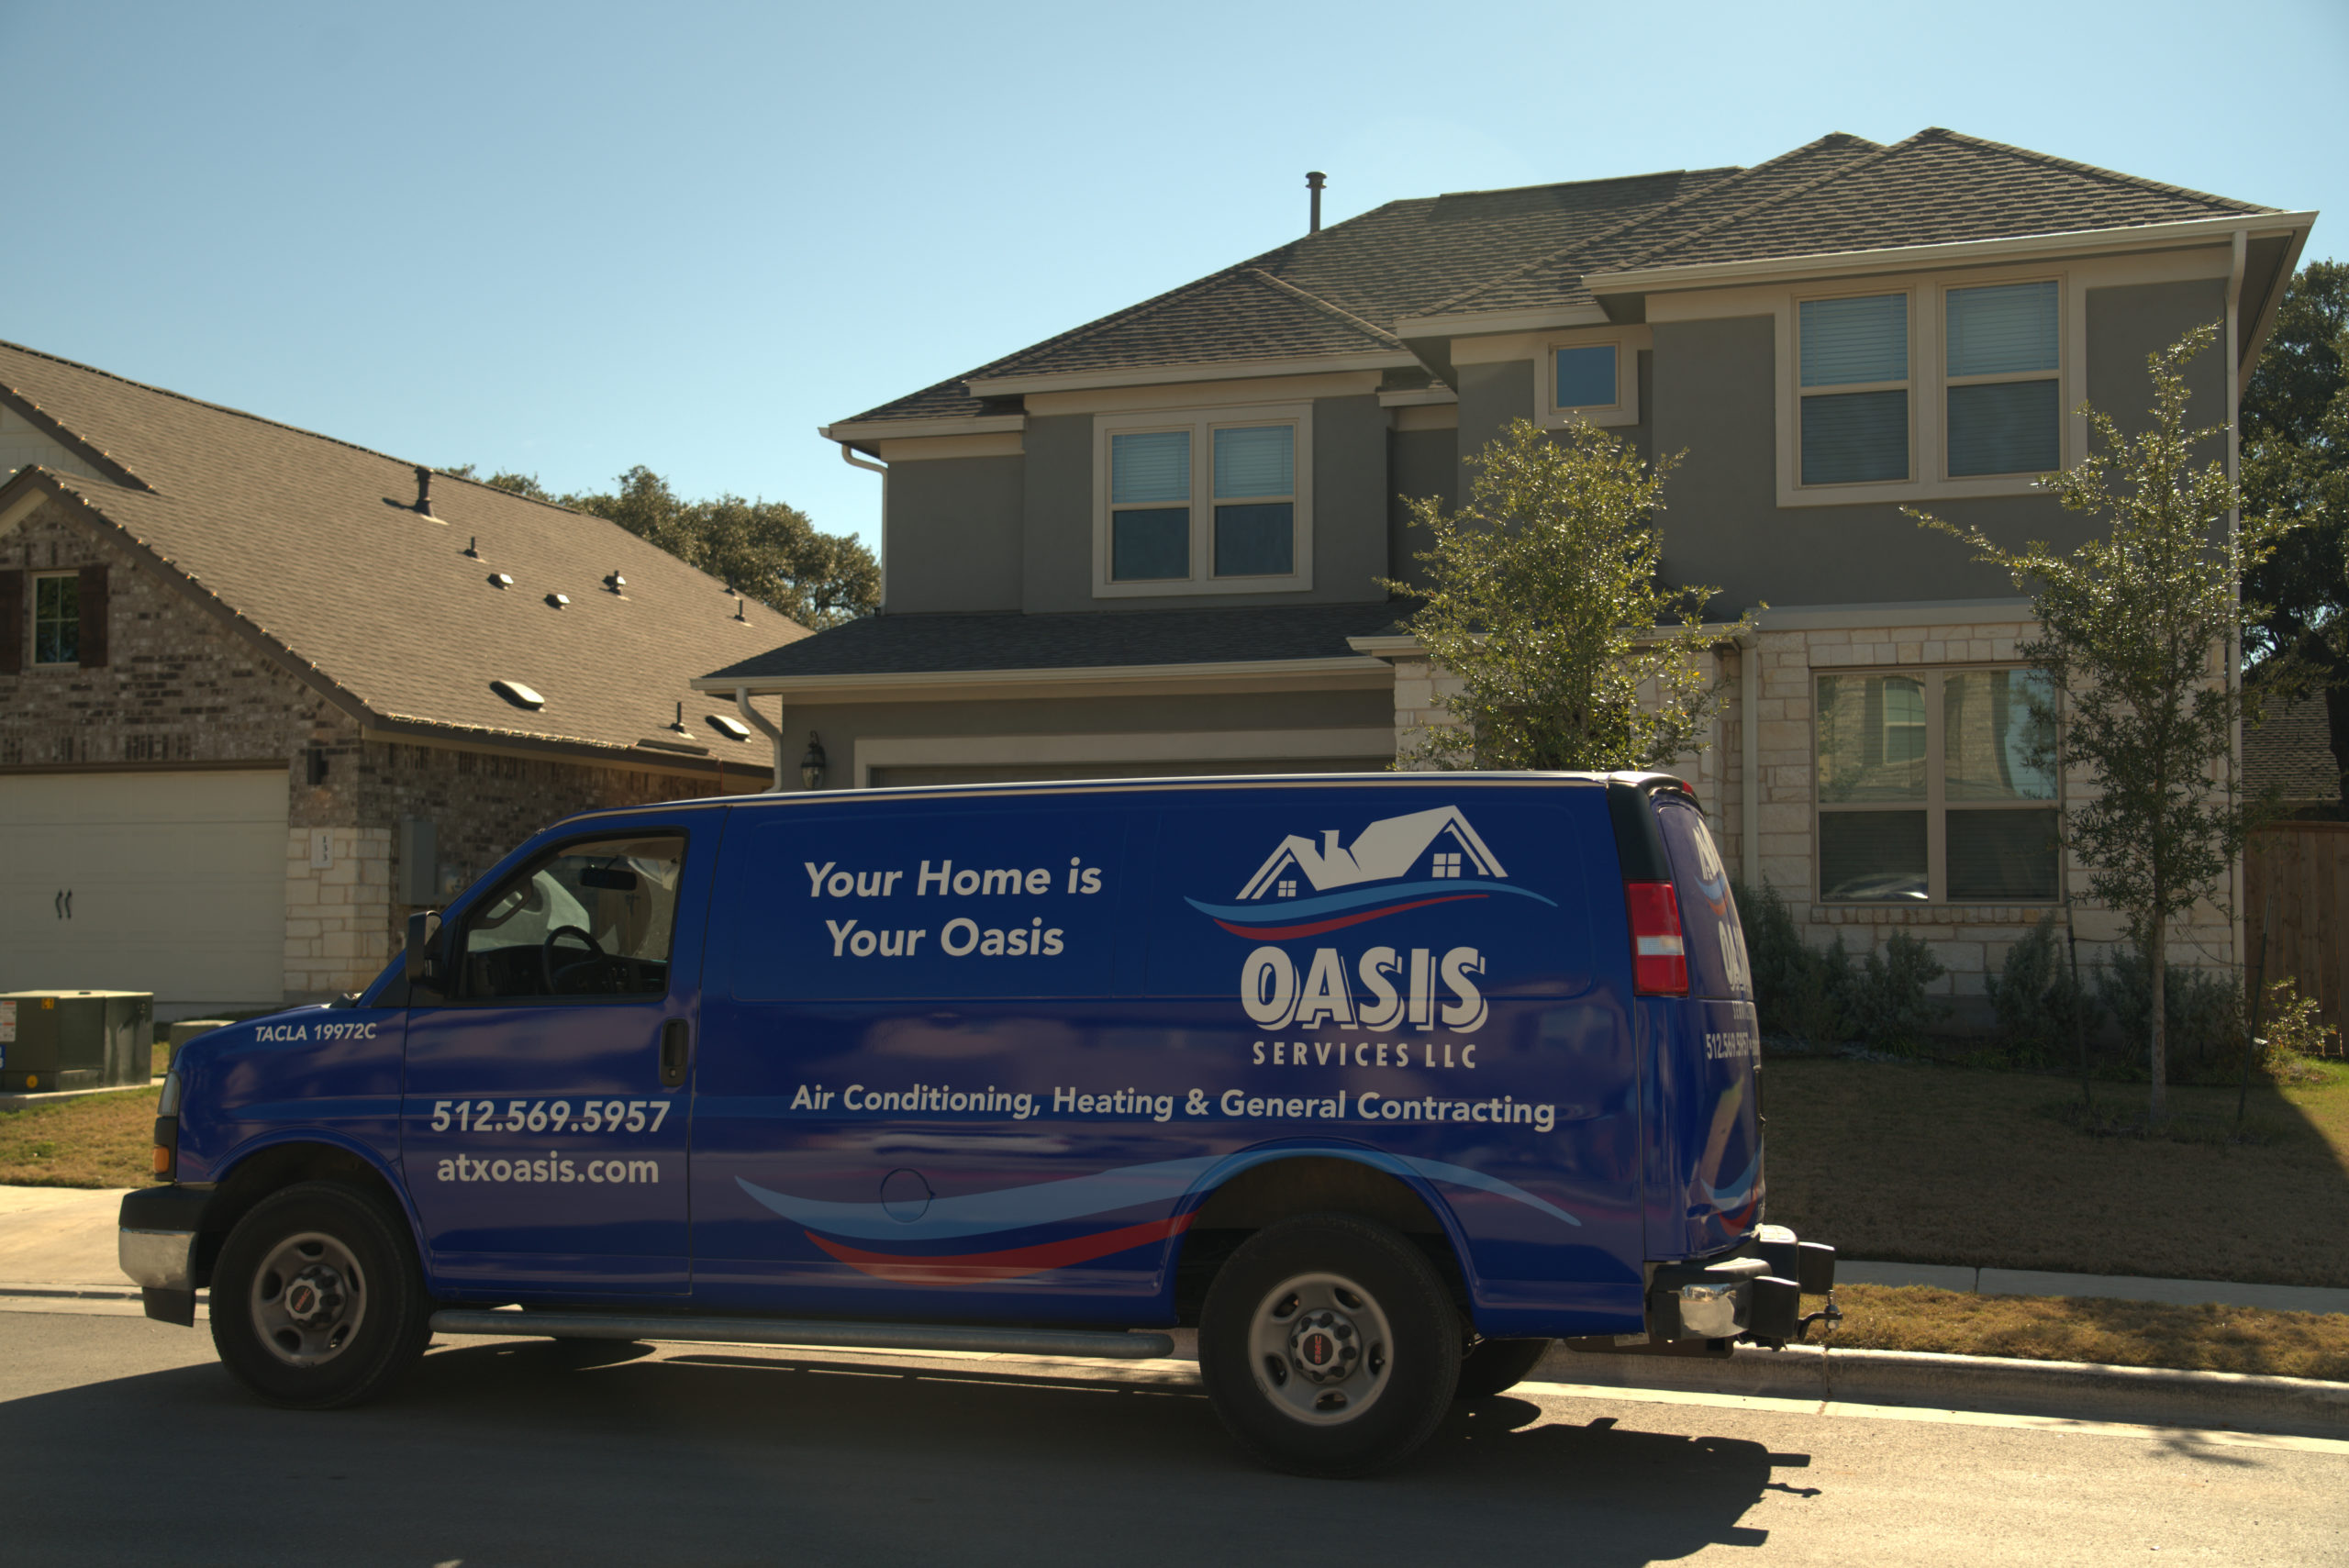 austin-ac-questions-answered-for-you-oasis-services